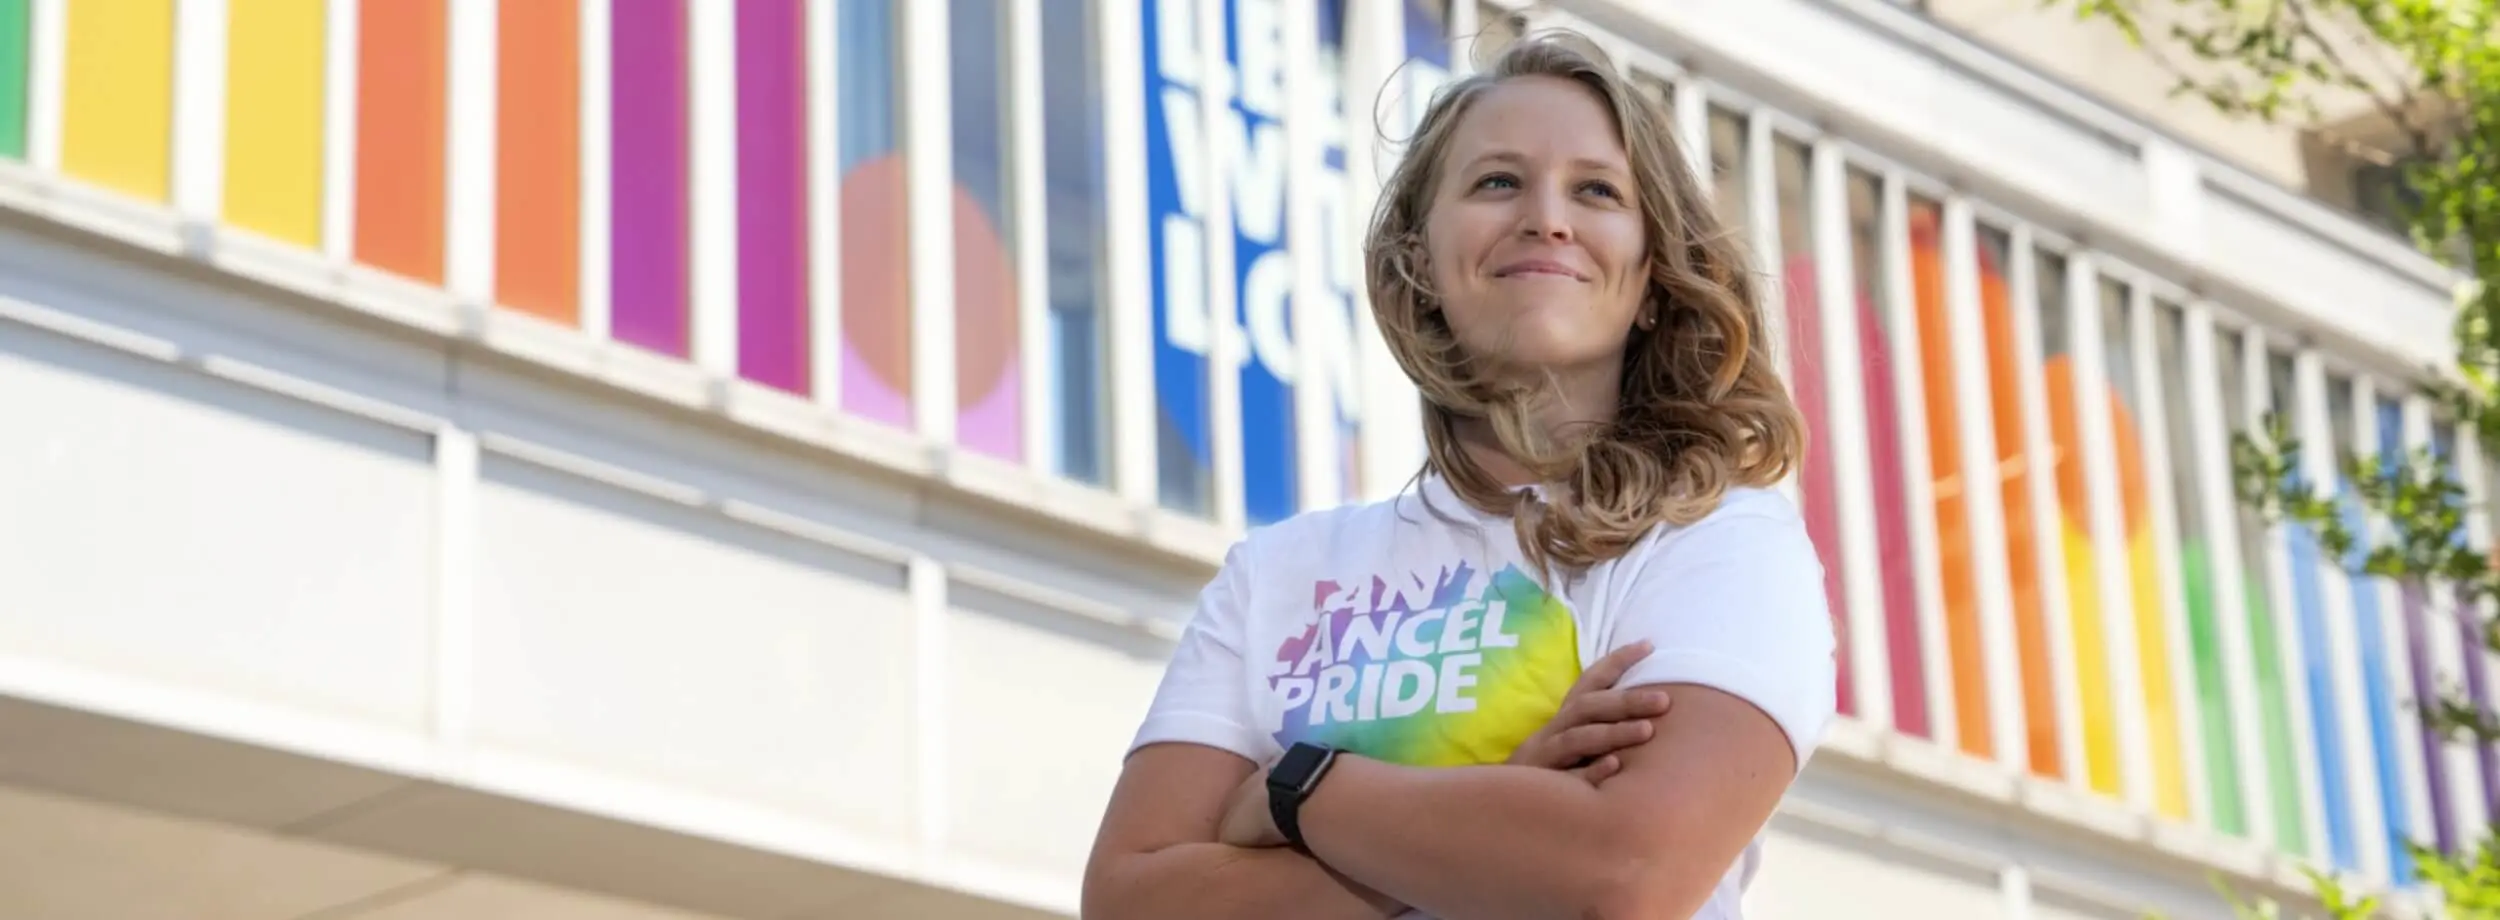 Person in Can’t Cancel Pride t-shirt at Cincinnati GO which is decorated with a rainbow and the words “Lead with Love”. 